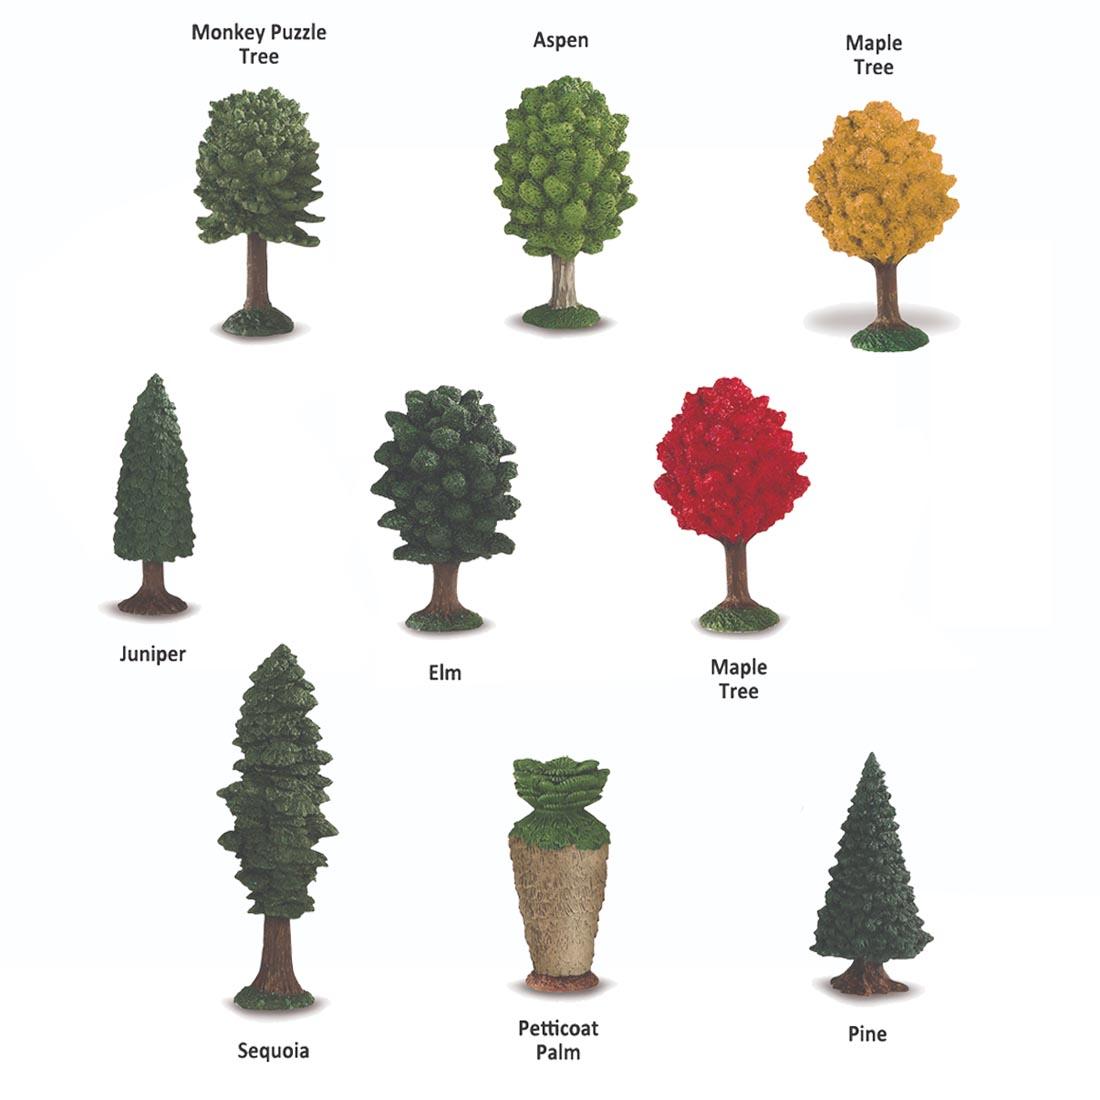 9 pieces from the Tree Figurine Set labeled with their names: monkey puzzle, aspen, juniper, elm, sequoia, petticoat palm, pine and maple with both red and yellow leaves